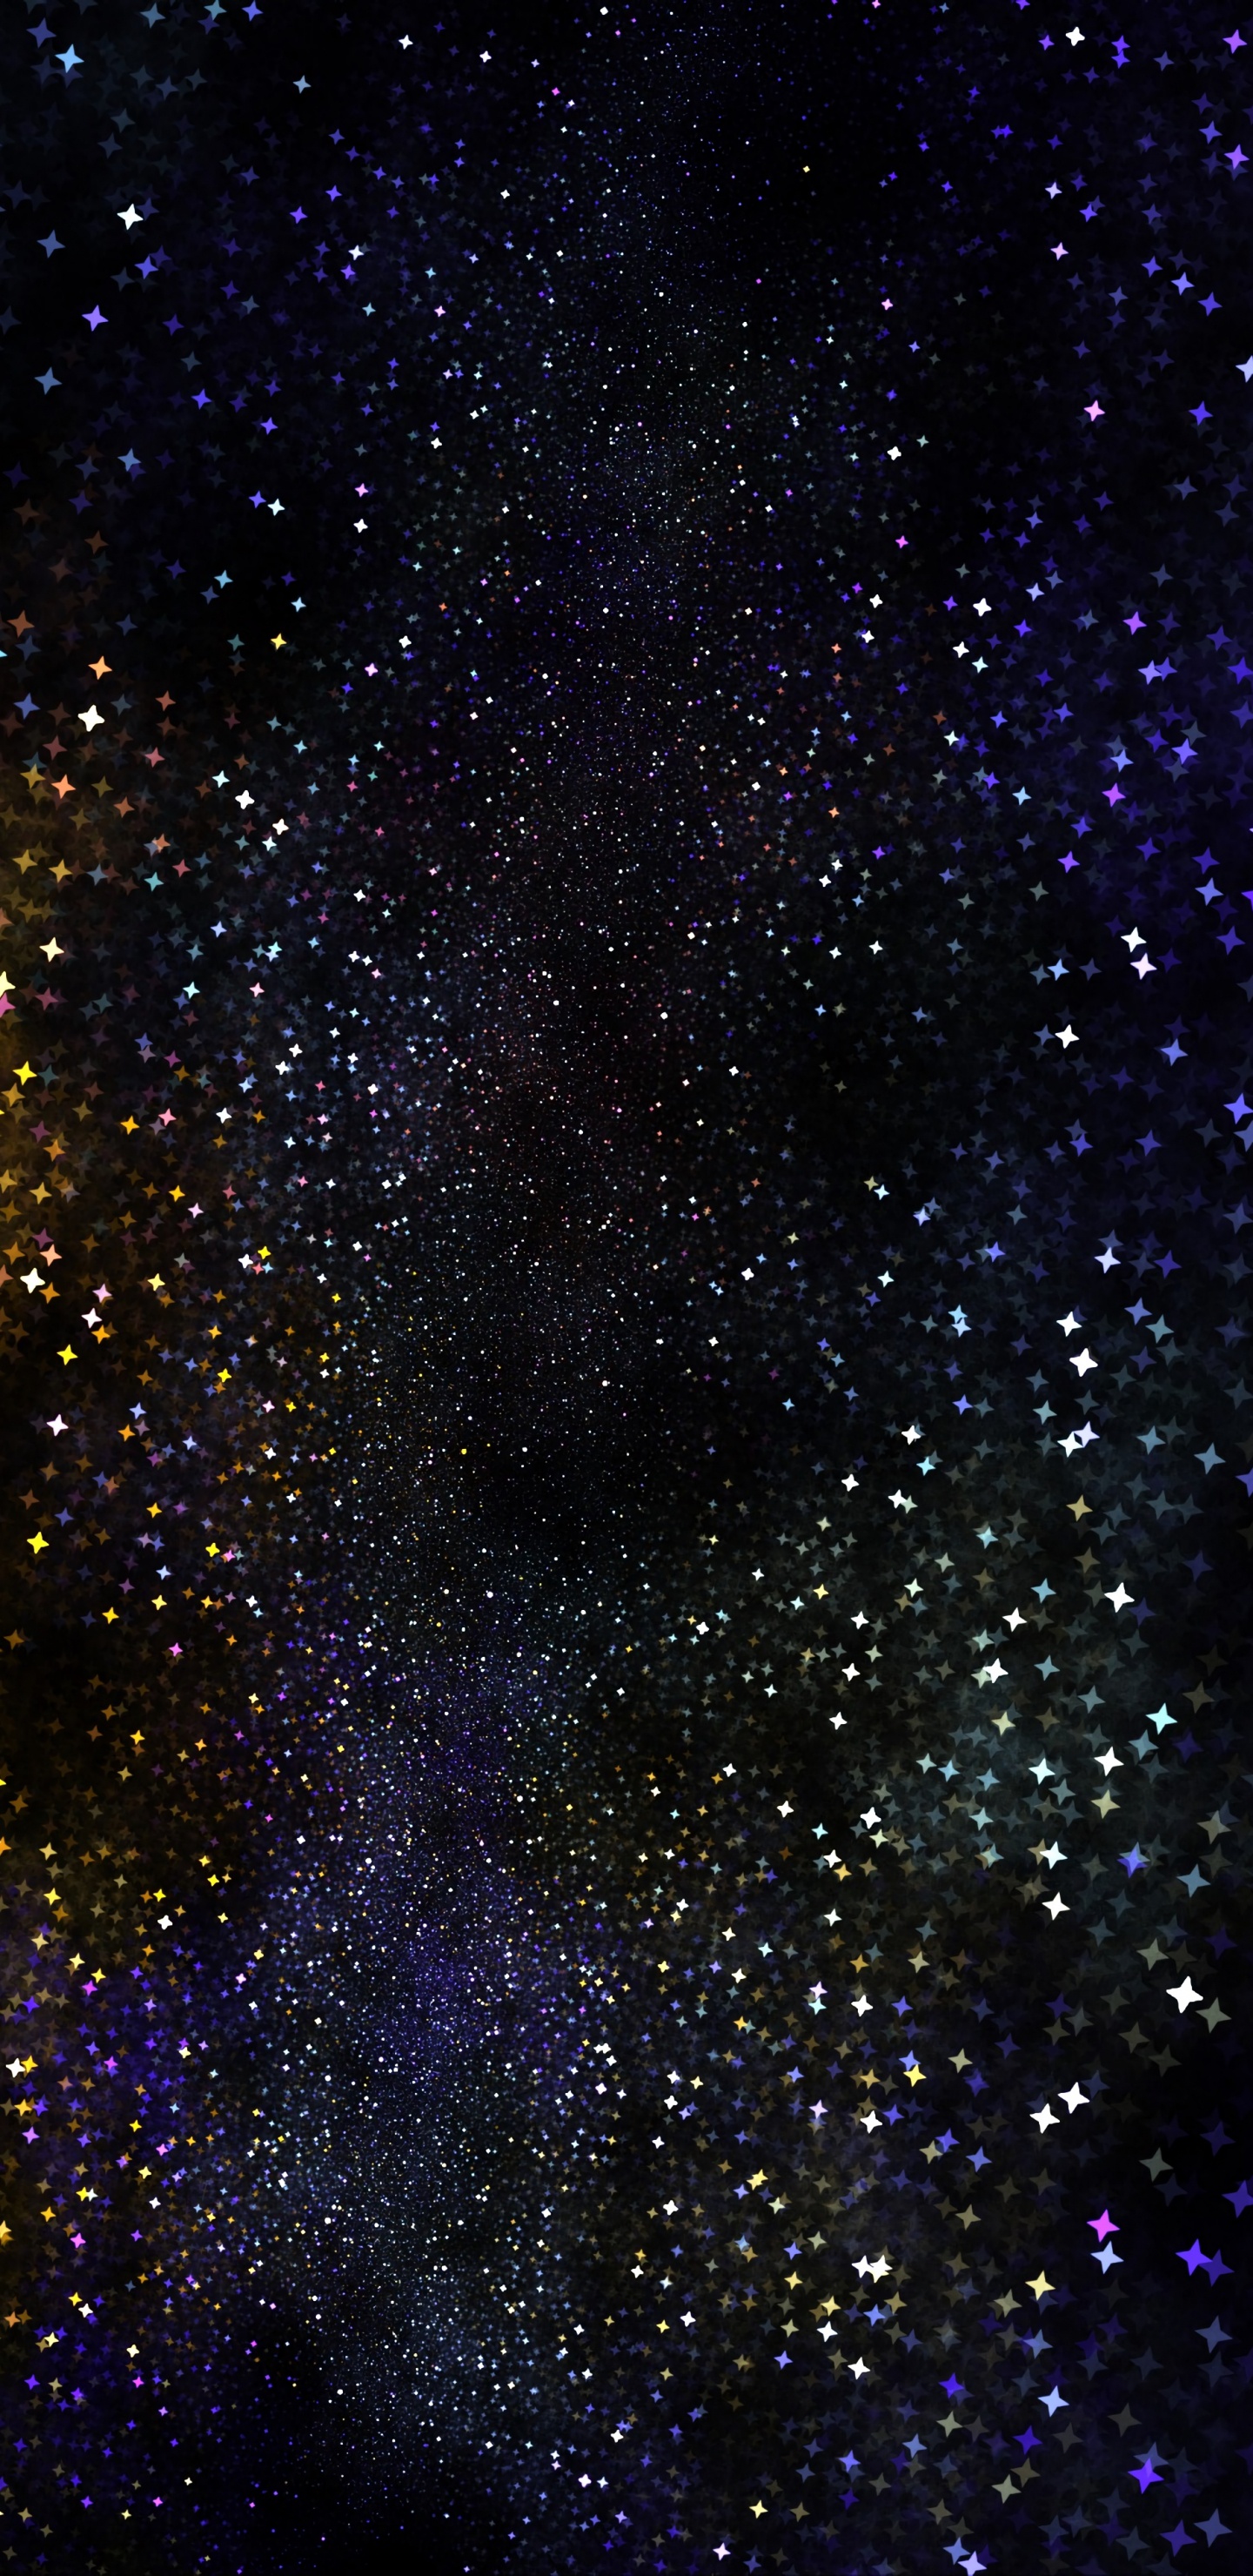 Starry Night Sky Over Starry Night. Wallpaper in 1440x2960 Resolution